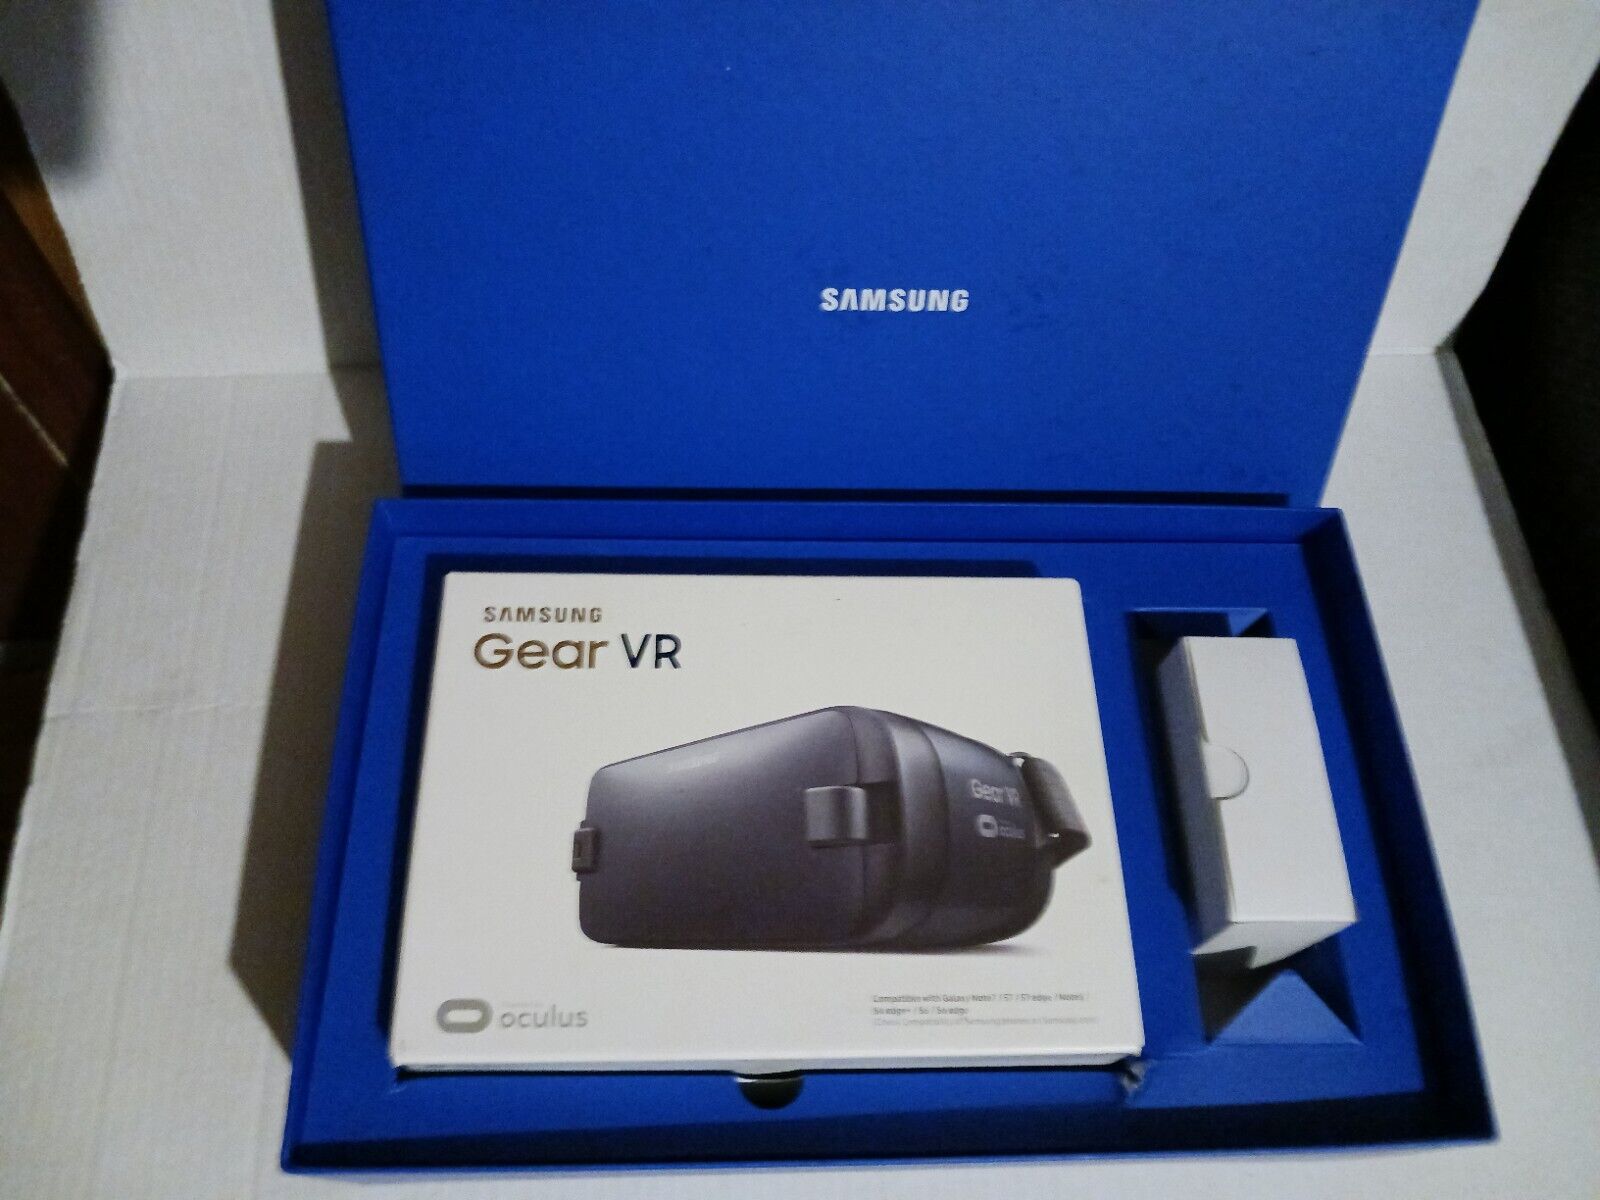 Samsung Gear VR - Compatible with Galaxy Note7/S7/S7 Edge/Note 5/S6 Edge+/Edge 6 Samsung Samsung Gear VR